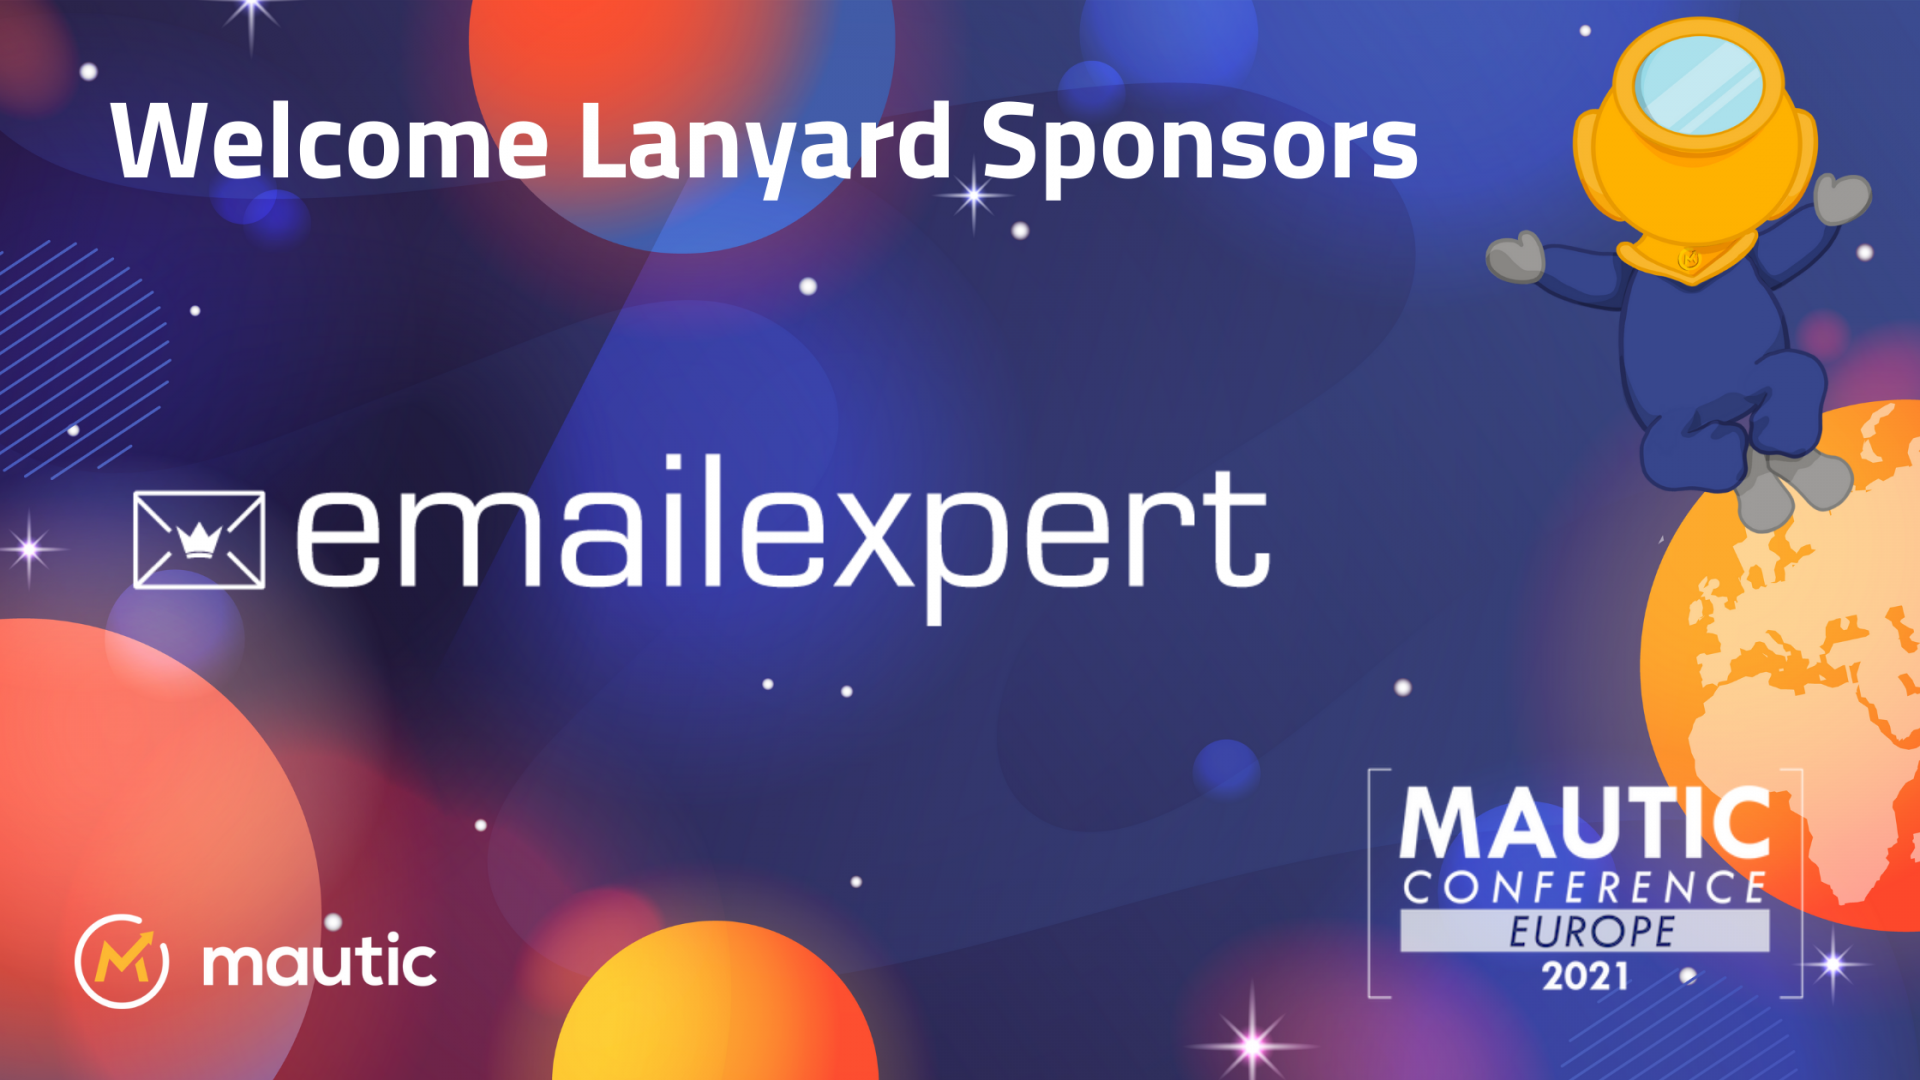 Welcome Lanyard Sponsors with Emailexpert logo and Mautinaut.